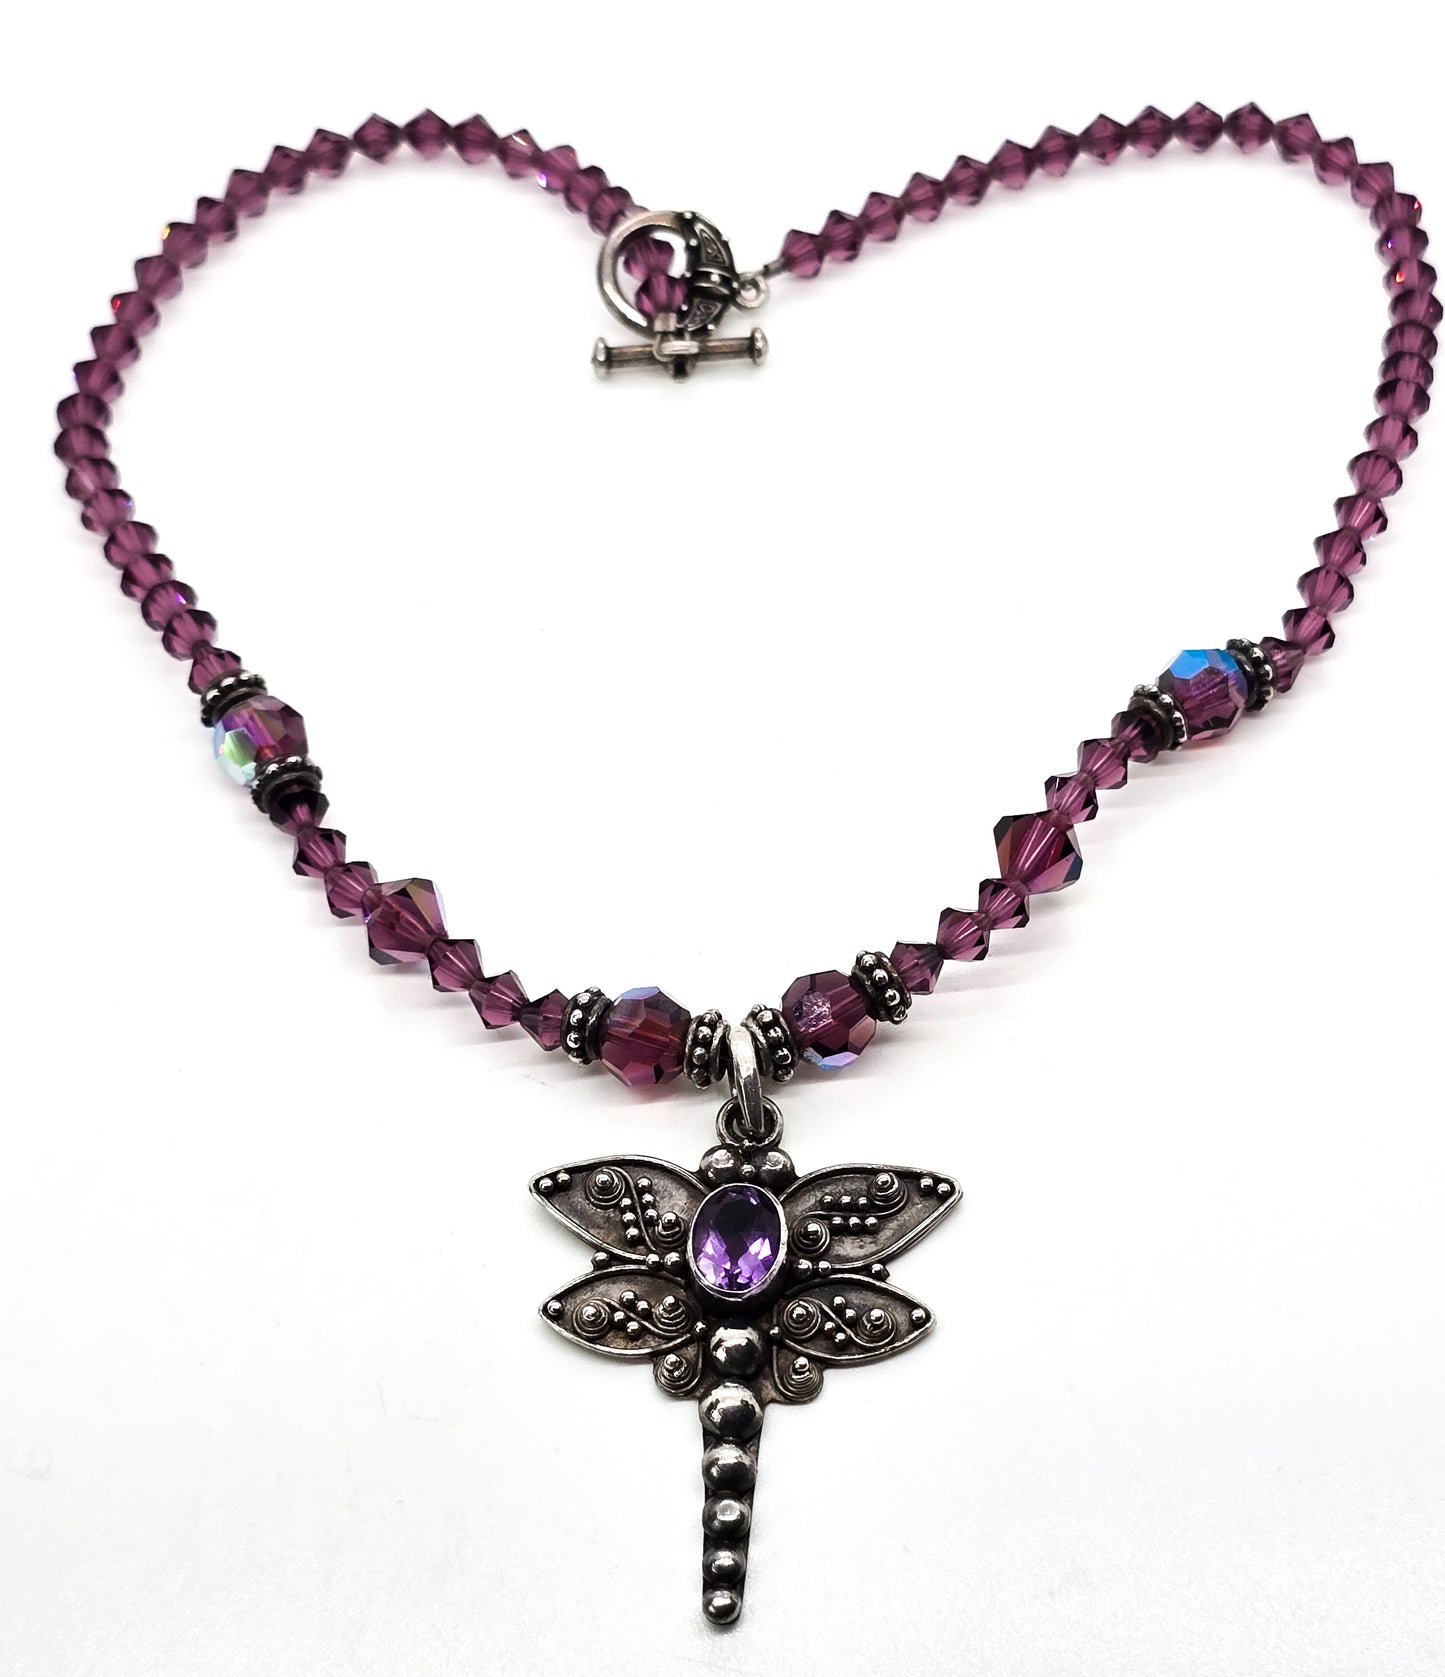 Dragonfly Amethyst tribal sterling silver and Swarovski crystal toggle clasp necklace